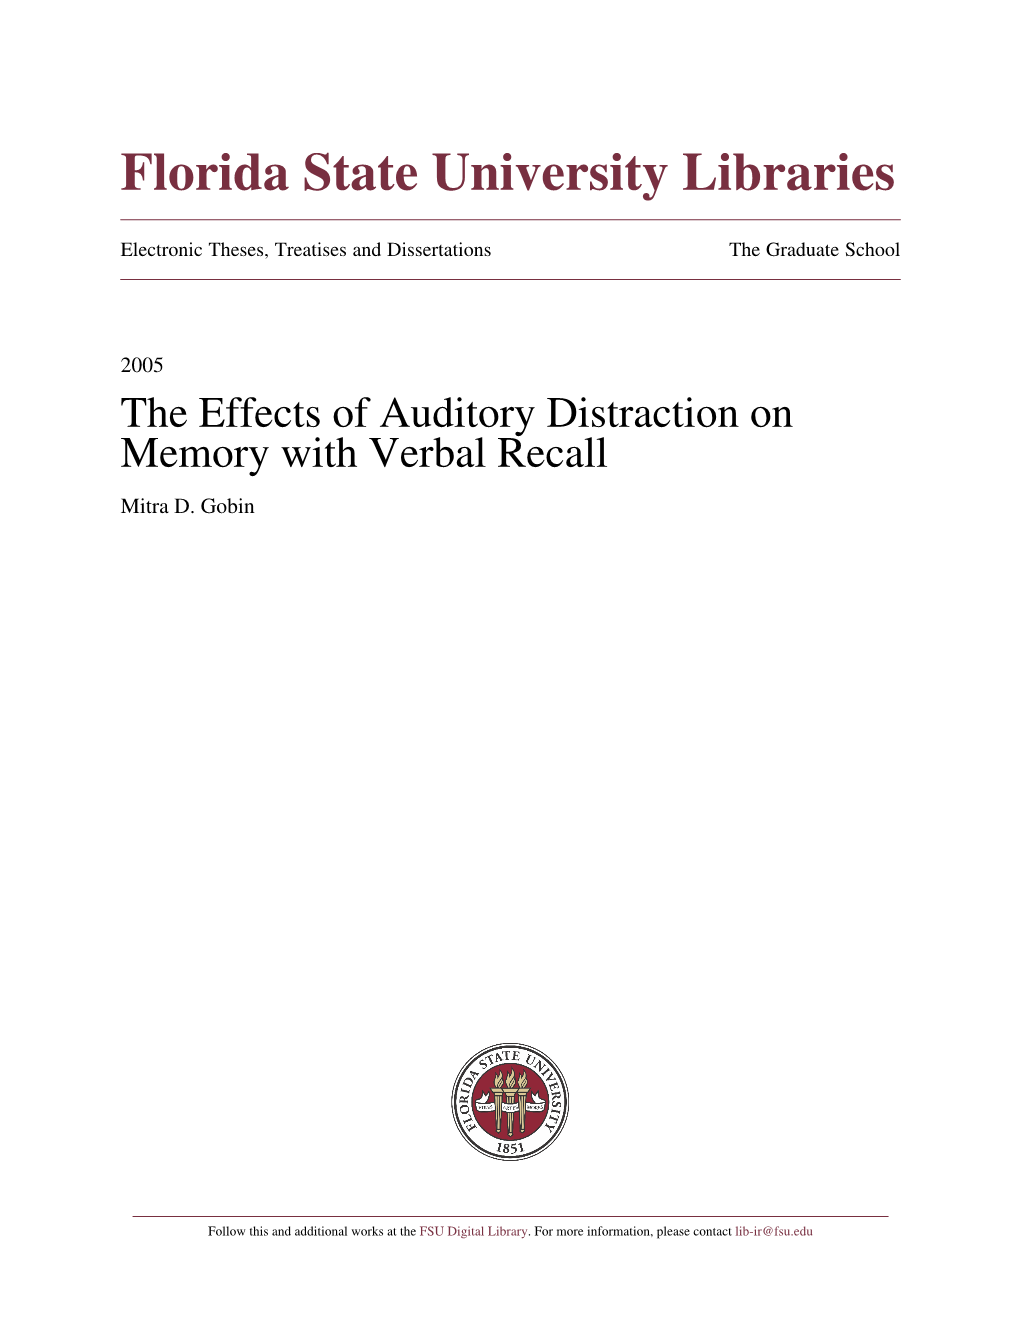 The Effects of Auditory Distraction on Memory with Verbal Recall Mitra D